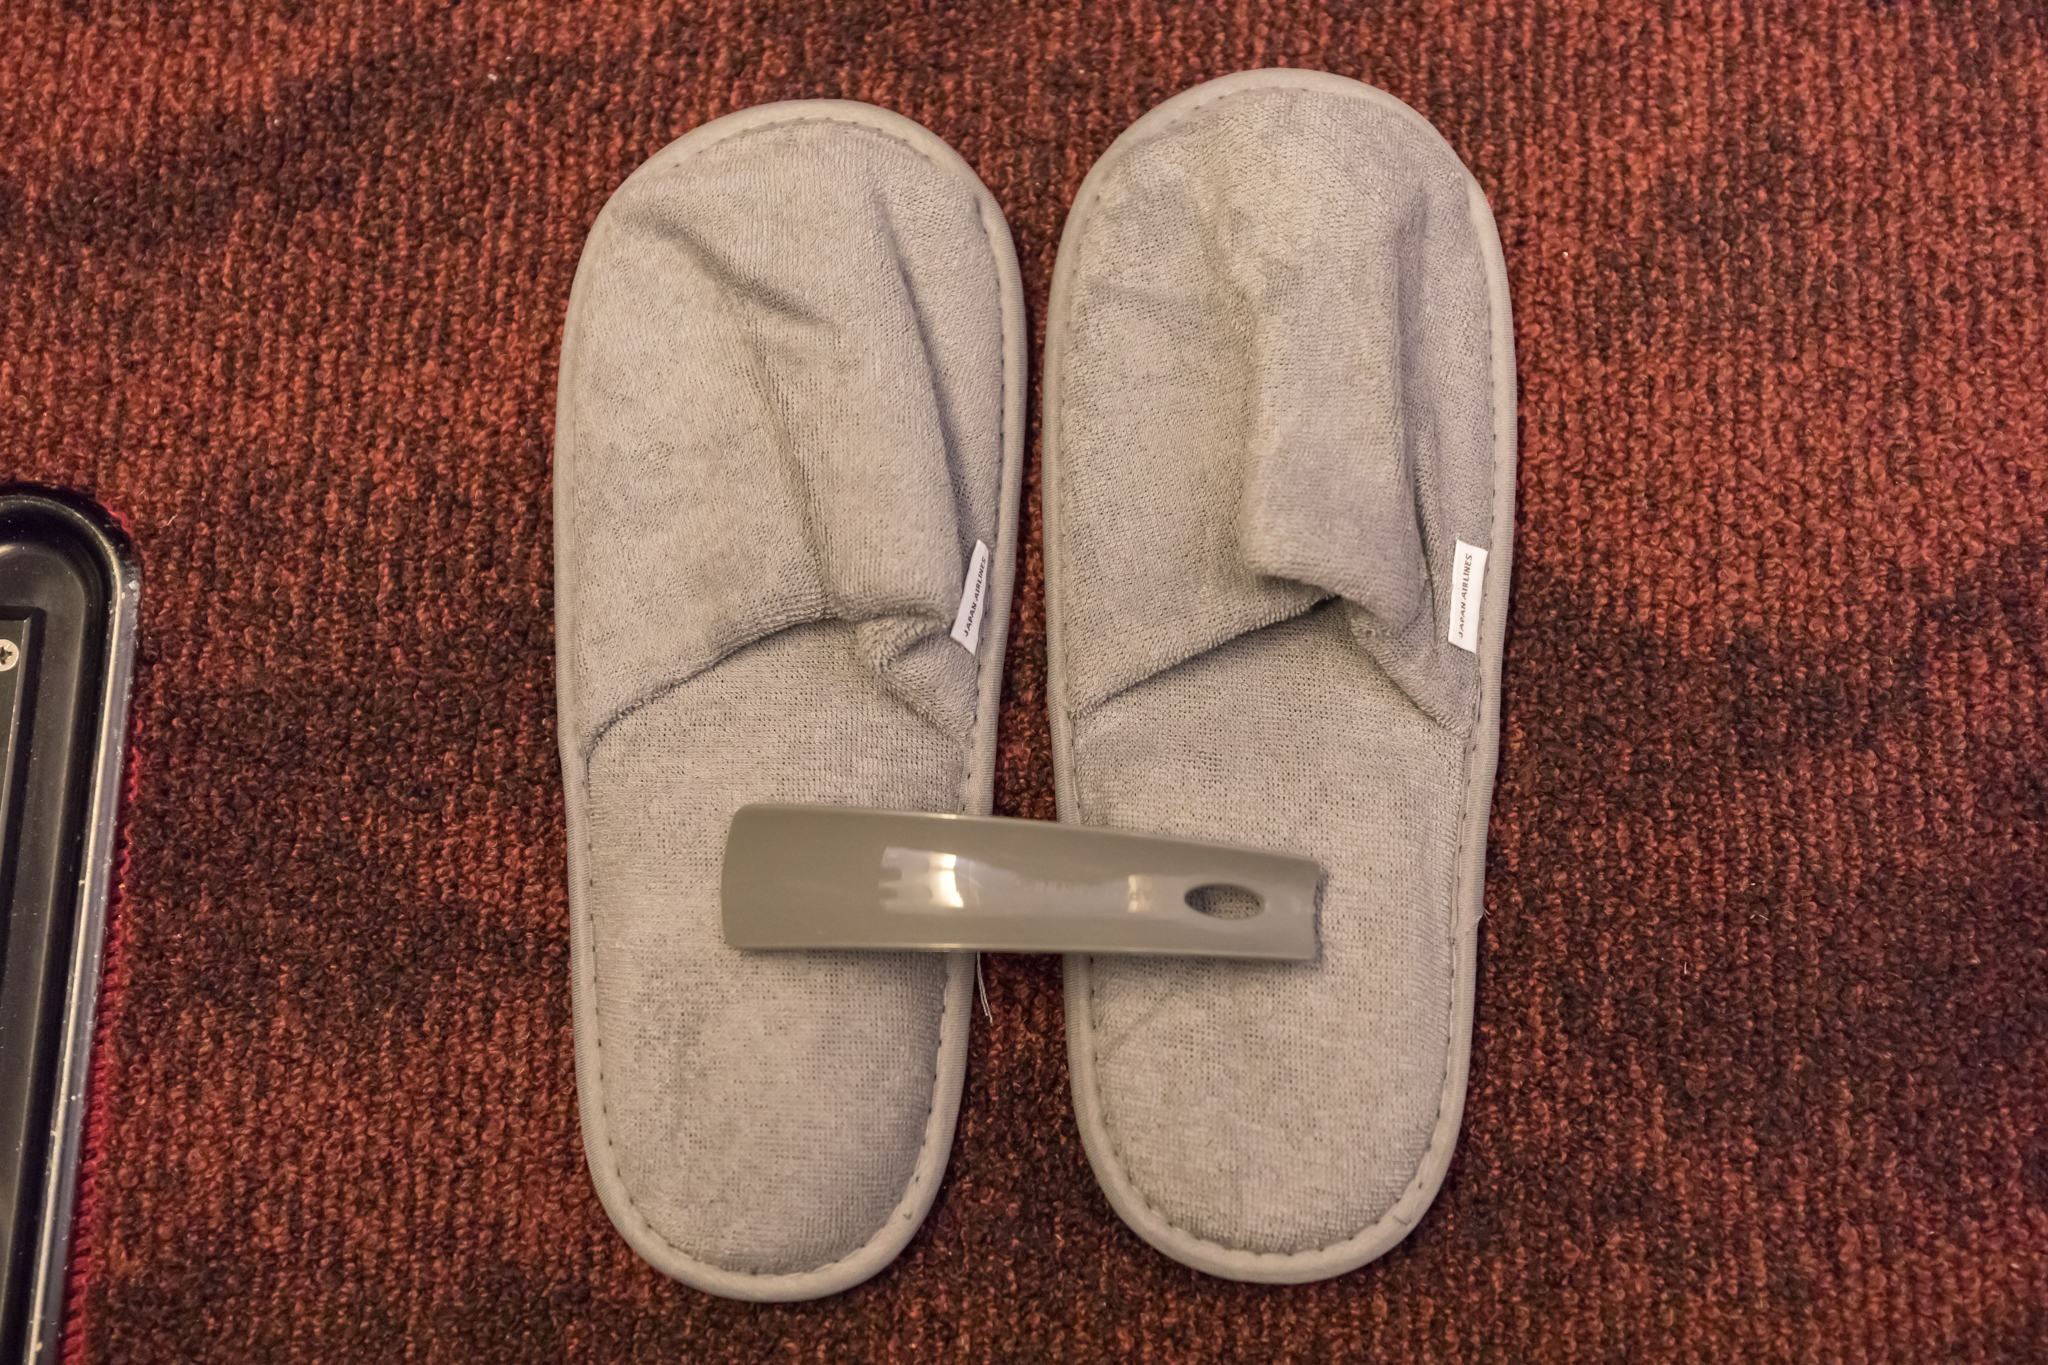 a pair of slippers on a carpet